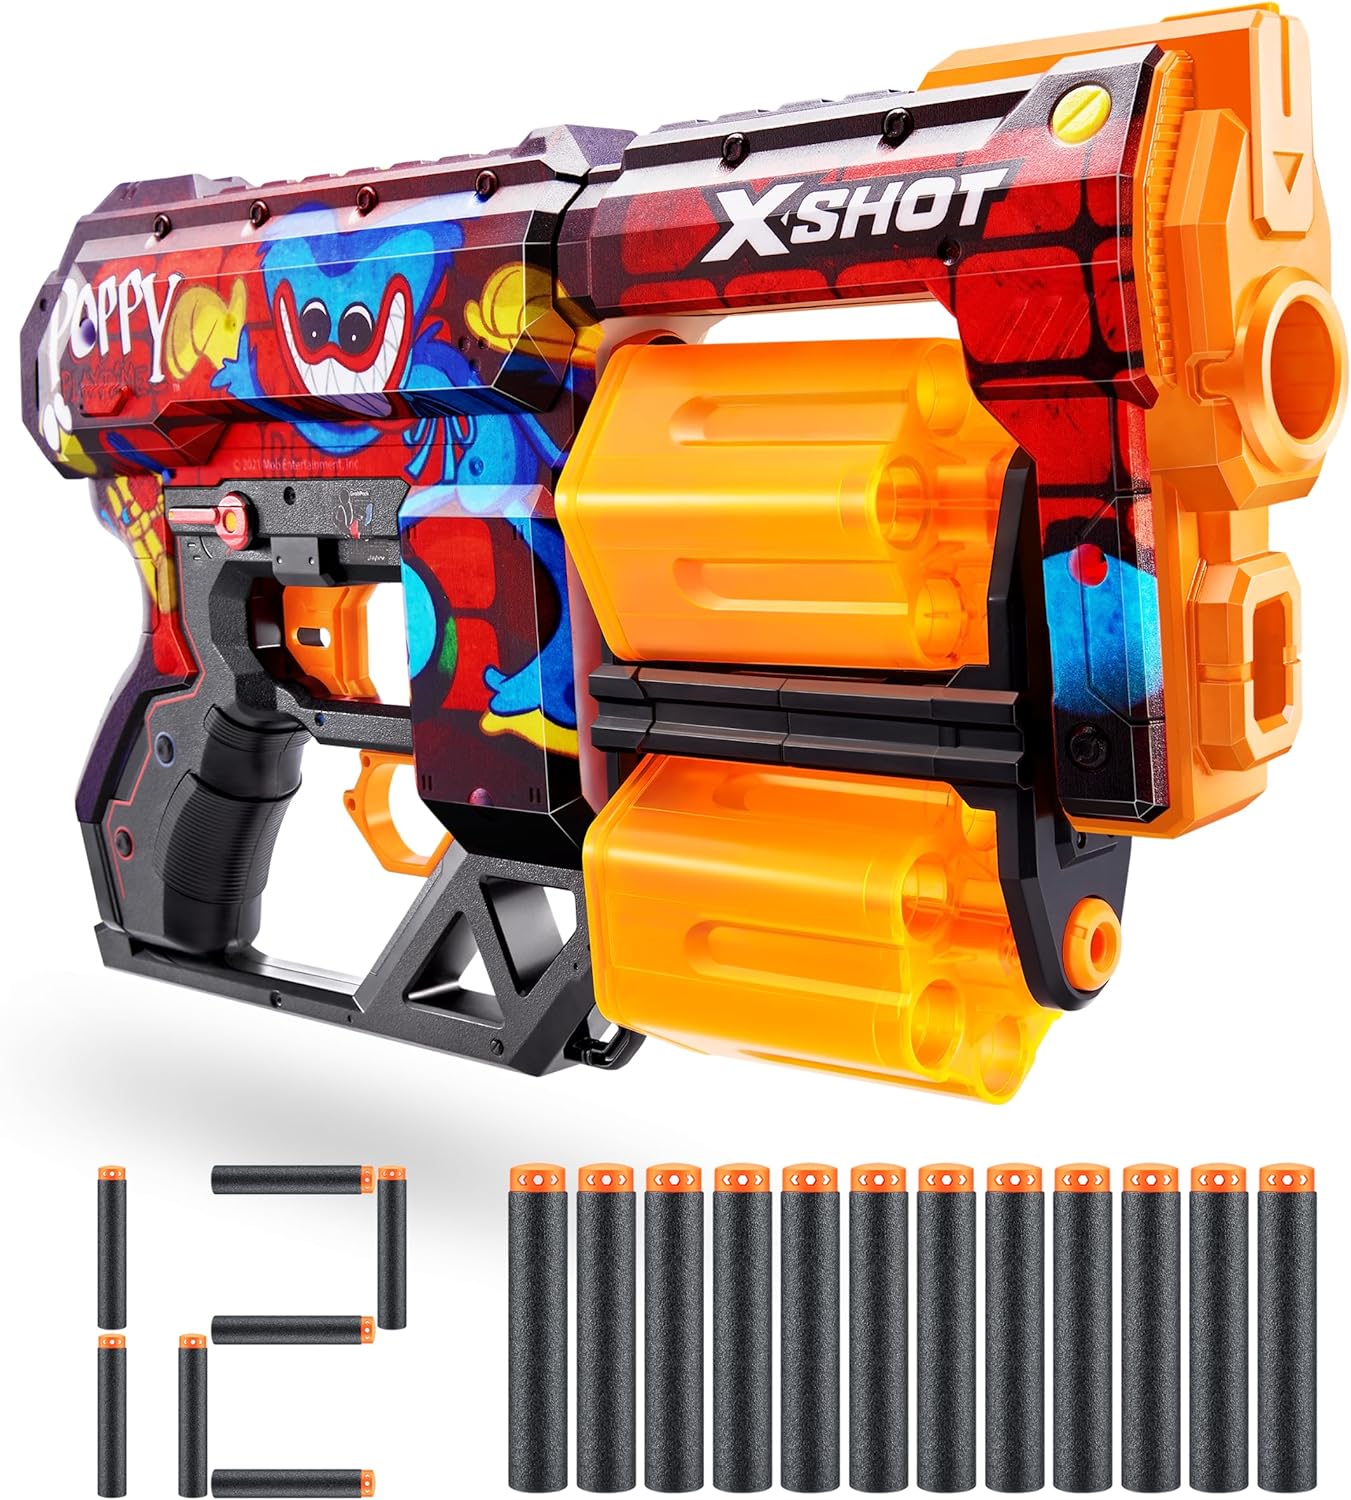 X-Shot Skins Dread Blaster - Poppy Playtime (Toony) by ZURU with 12 Darts, Rotating Double Barrel, Air Pocket Dart Technology, Toy Foam Blaster for Kids, Teens and Adults